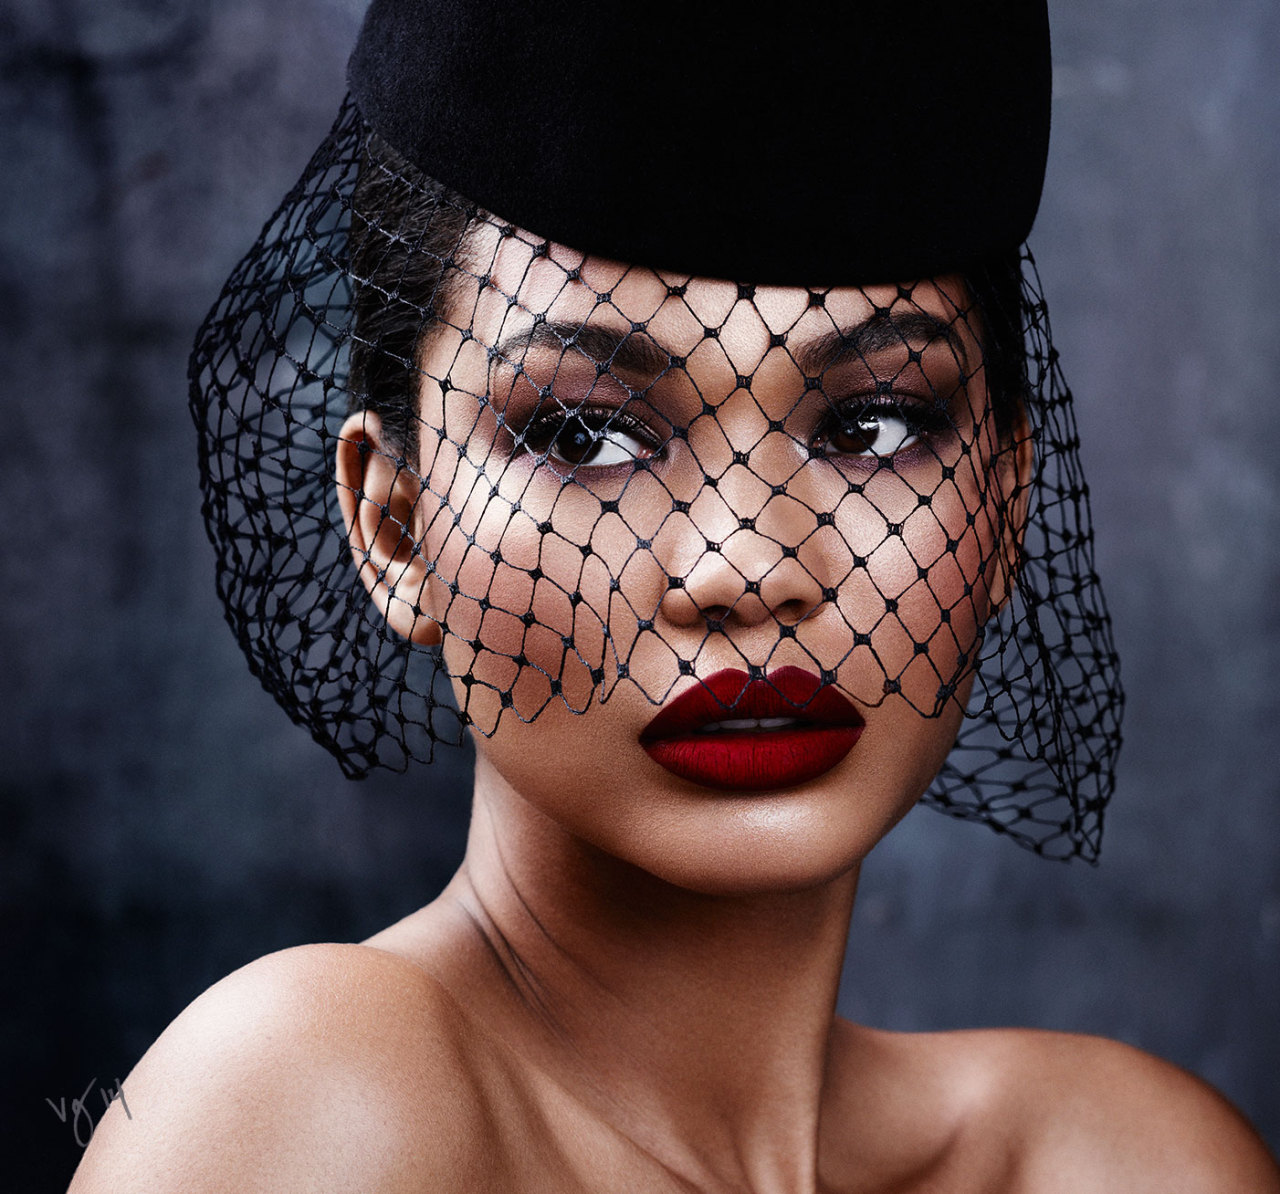 equestrianwrist:  Chanel Iman photographed by Ben Hassett for Violet Grey’s The